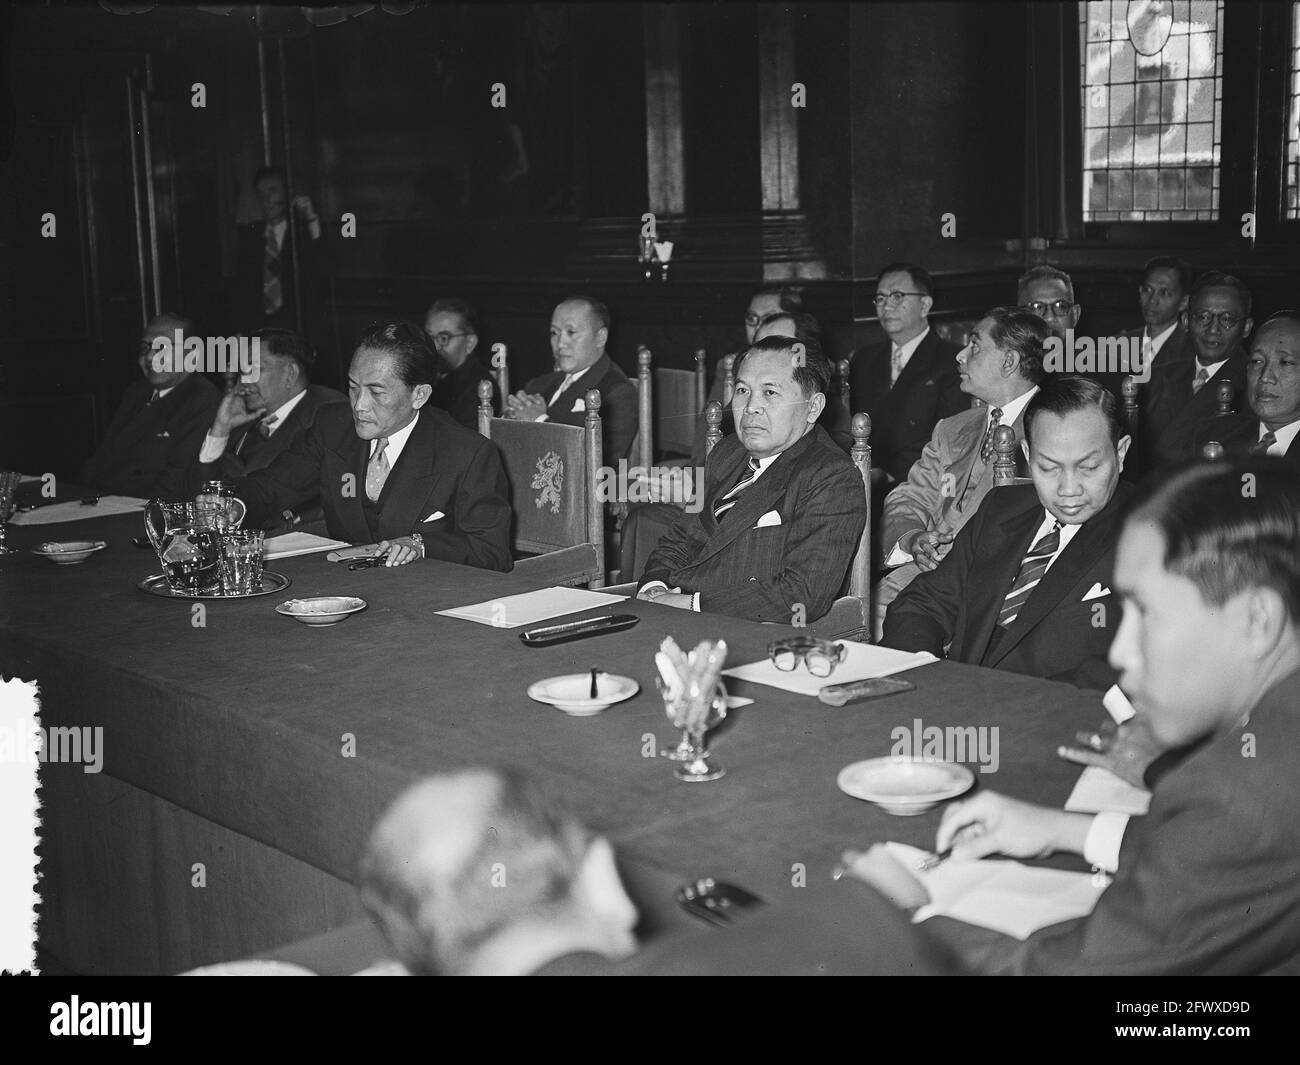 Opening Union Conference in Binnenhof, Dutch delegation, June 29, 1954, Openings, delegations, The Netherlands, 20th century press agency photo, news Stock Photo